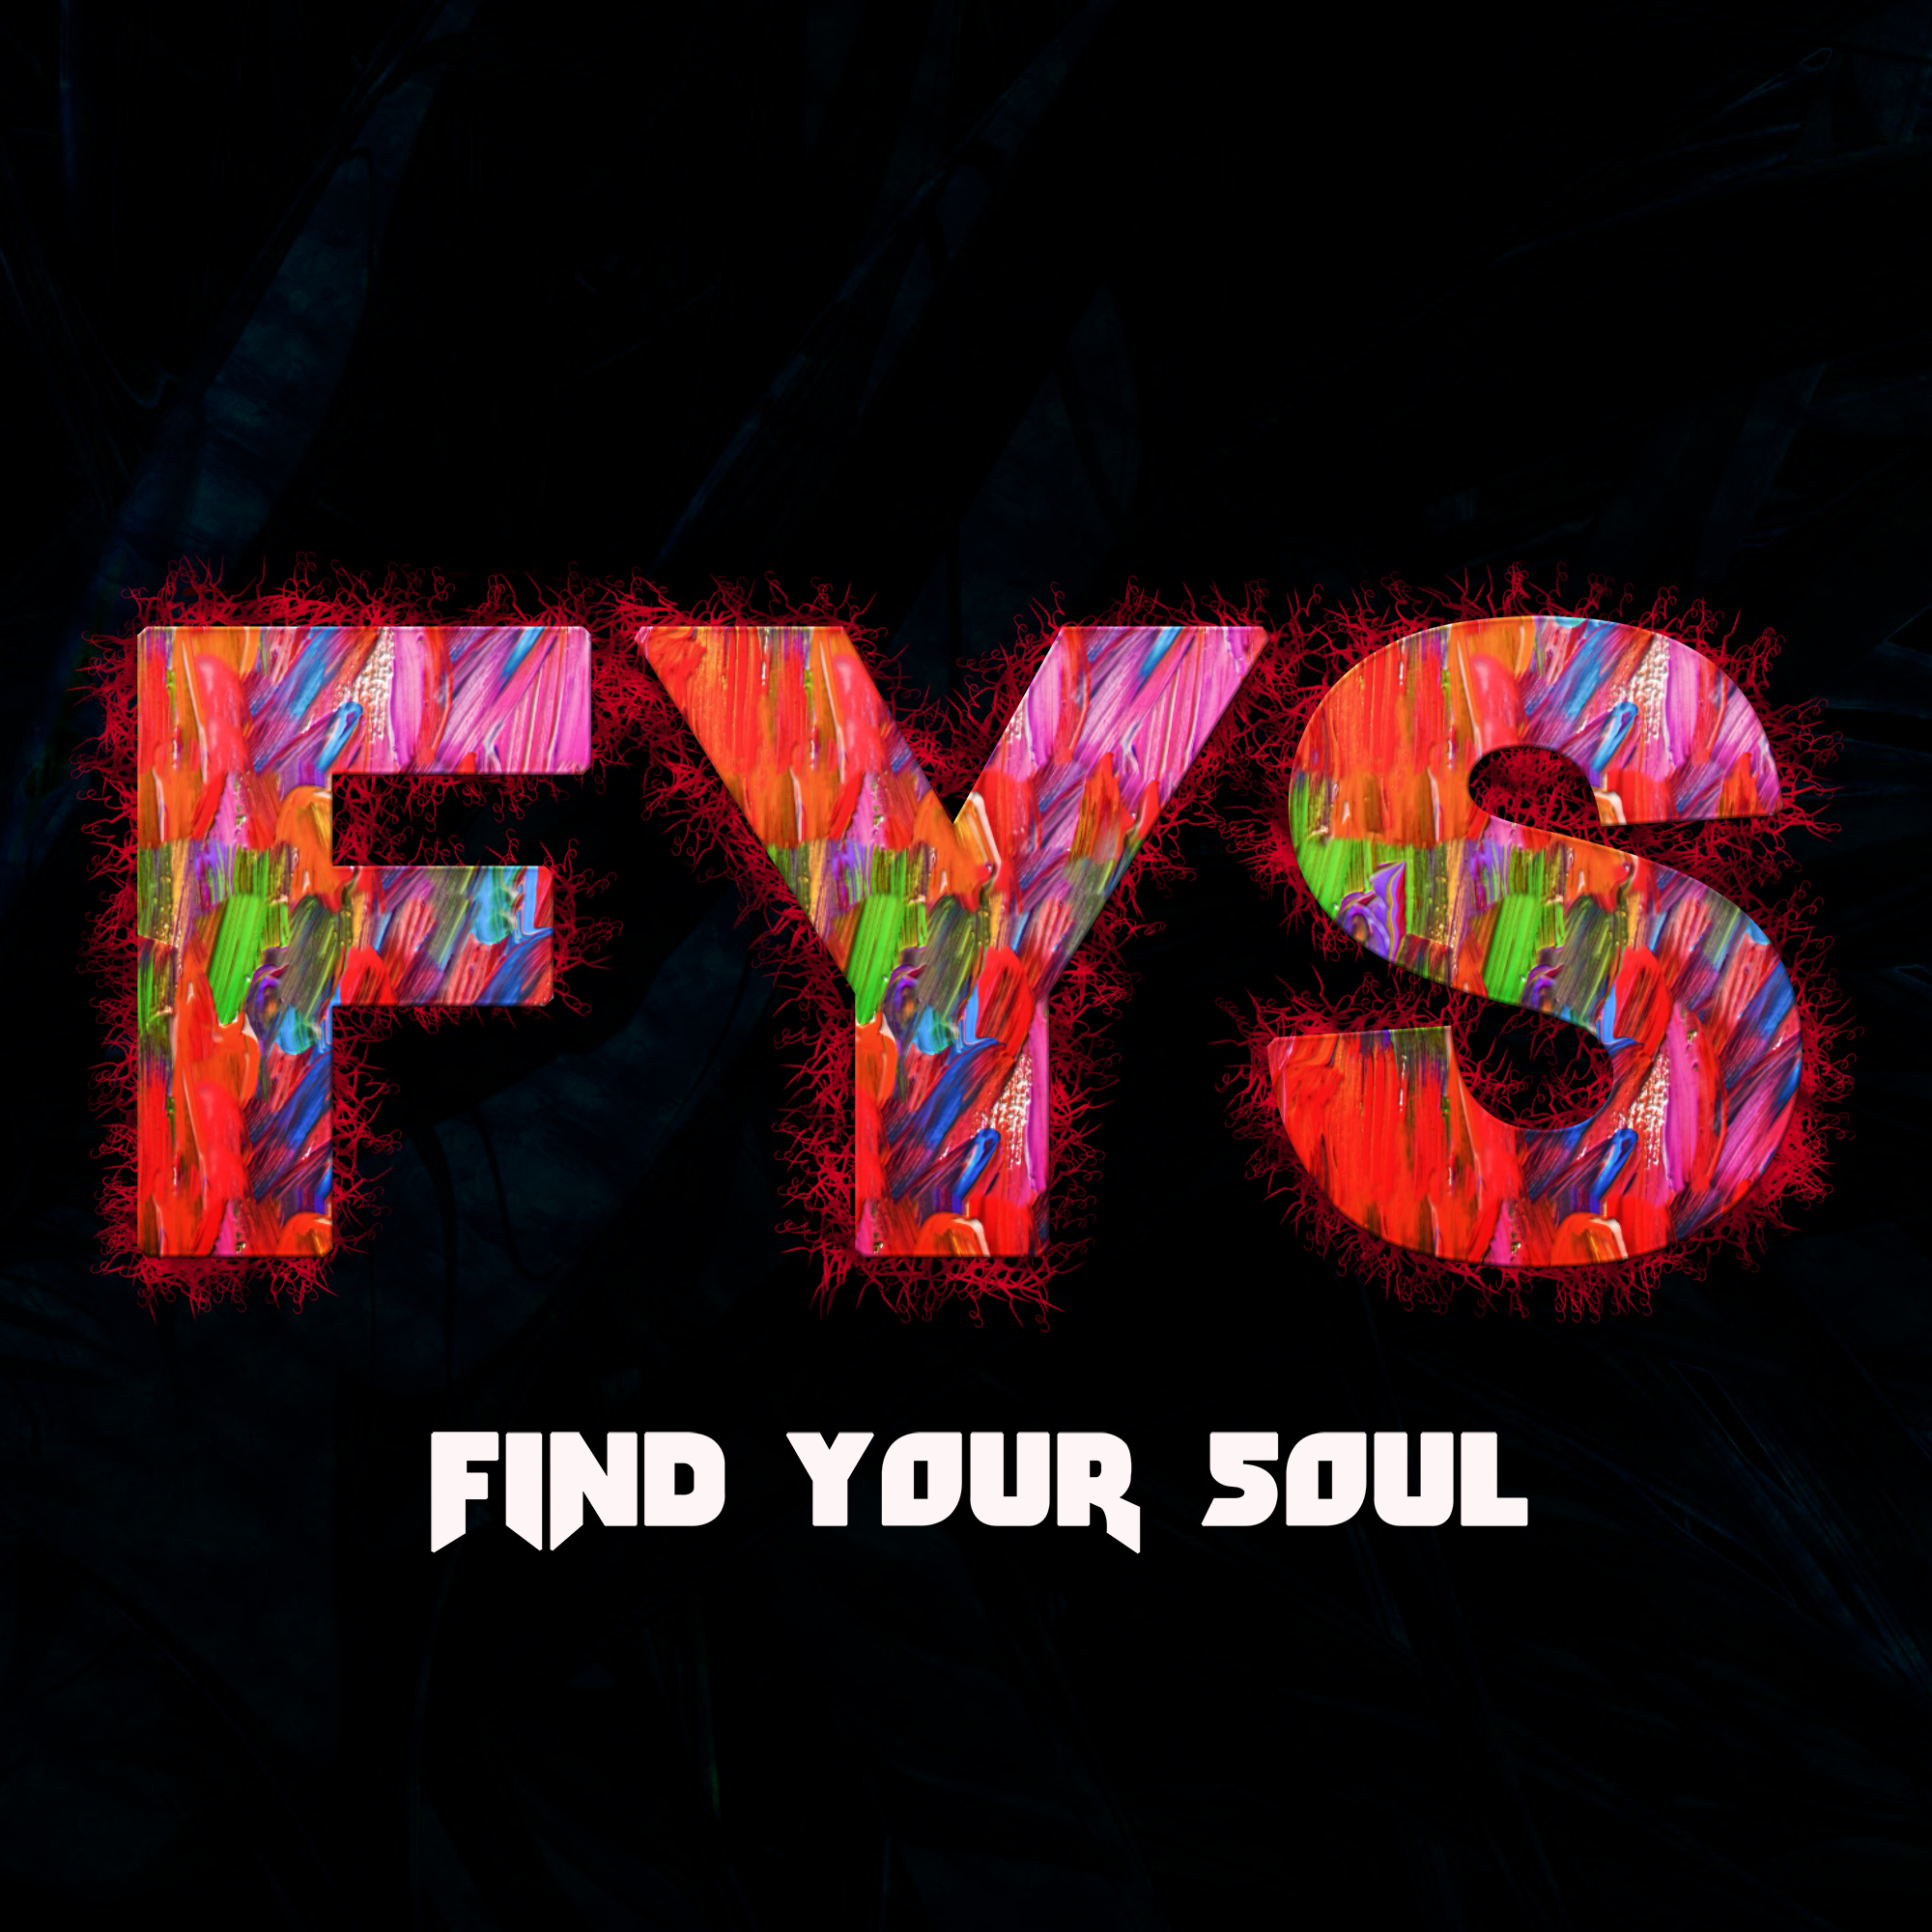 Find Your Soul